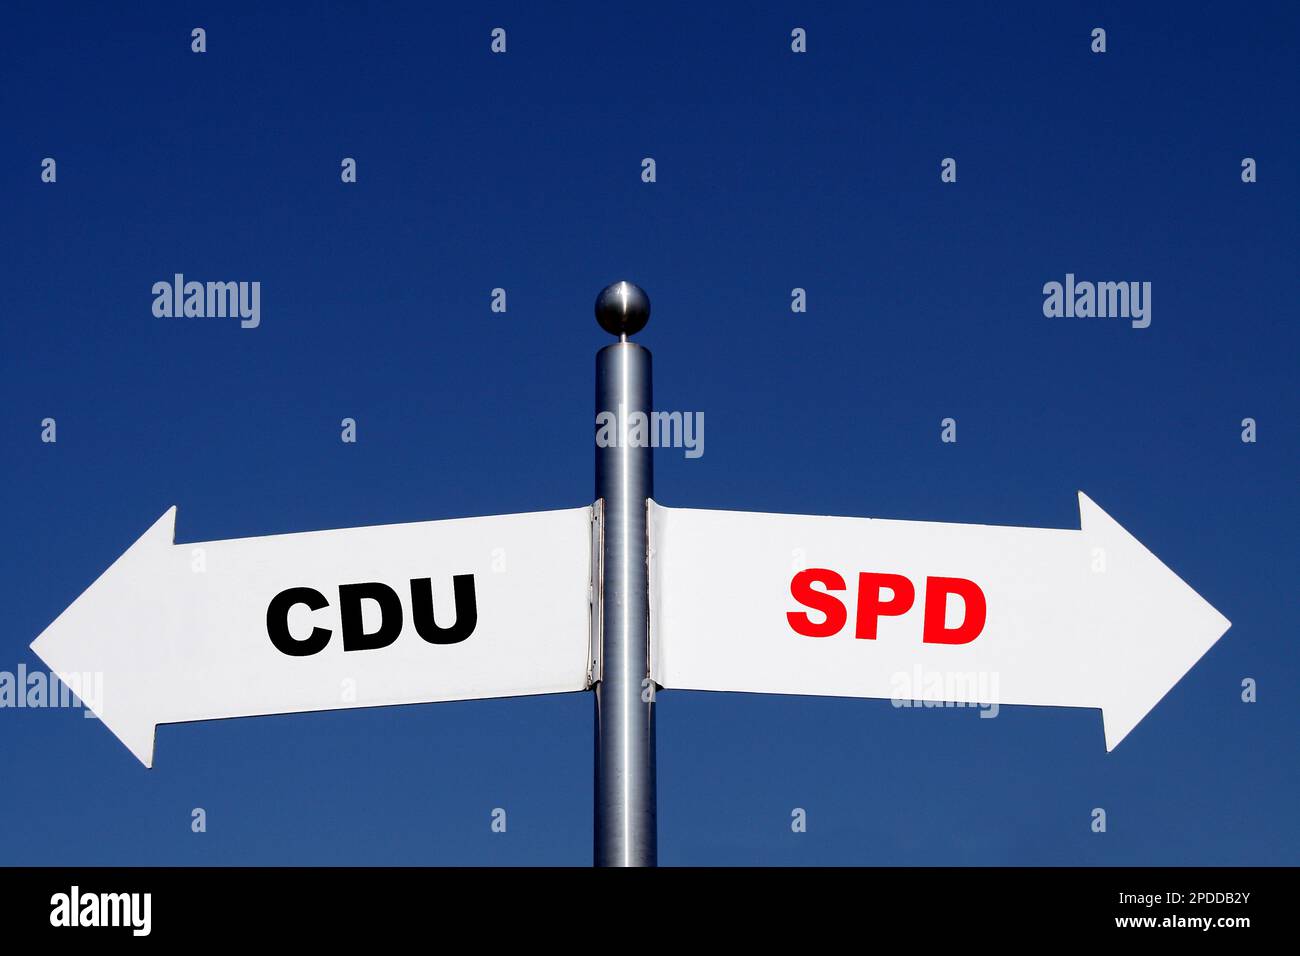 signposts pointing in different directions, options CDU - SPD Stock Photo